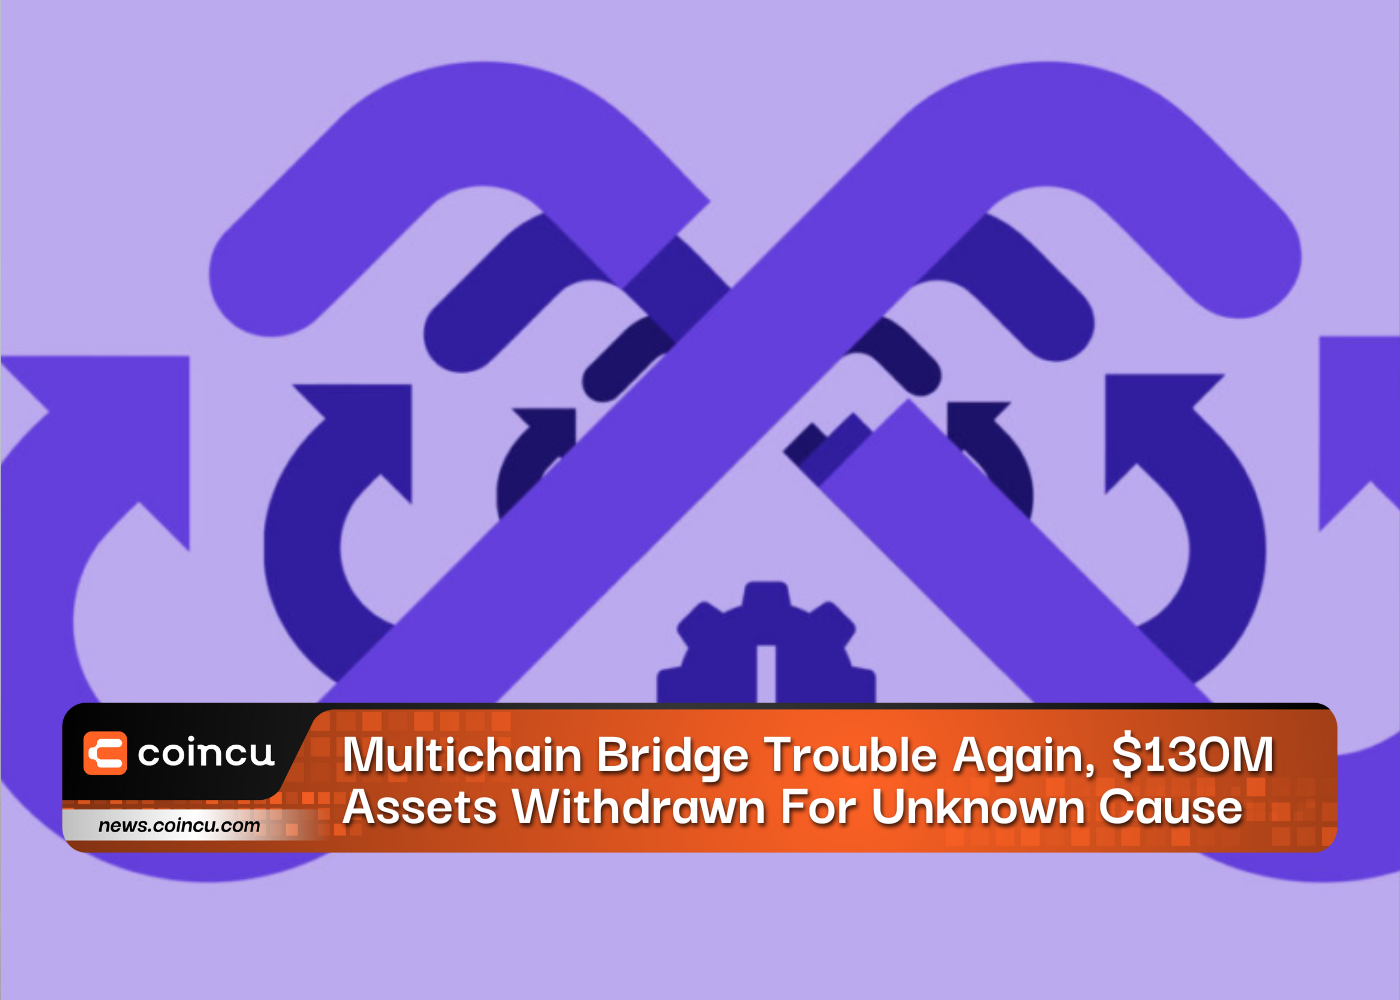 Multichain Bridge Trouble Again, $130M Assets Withdrawn For Unknown Cause